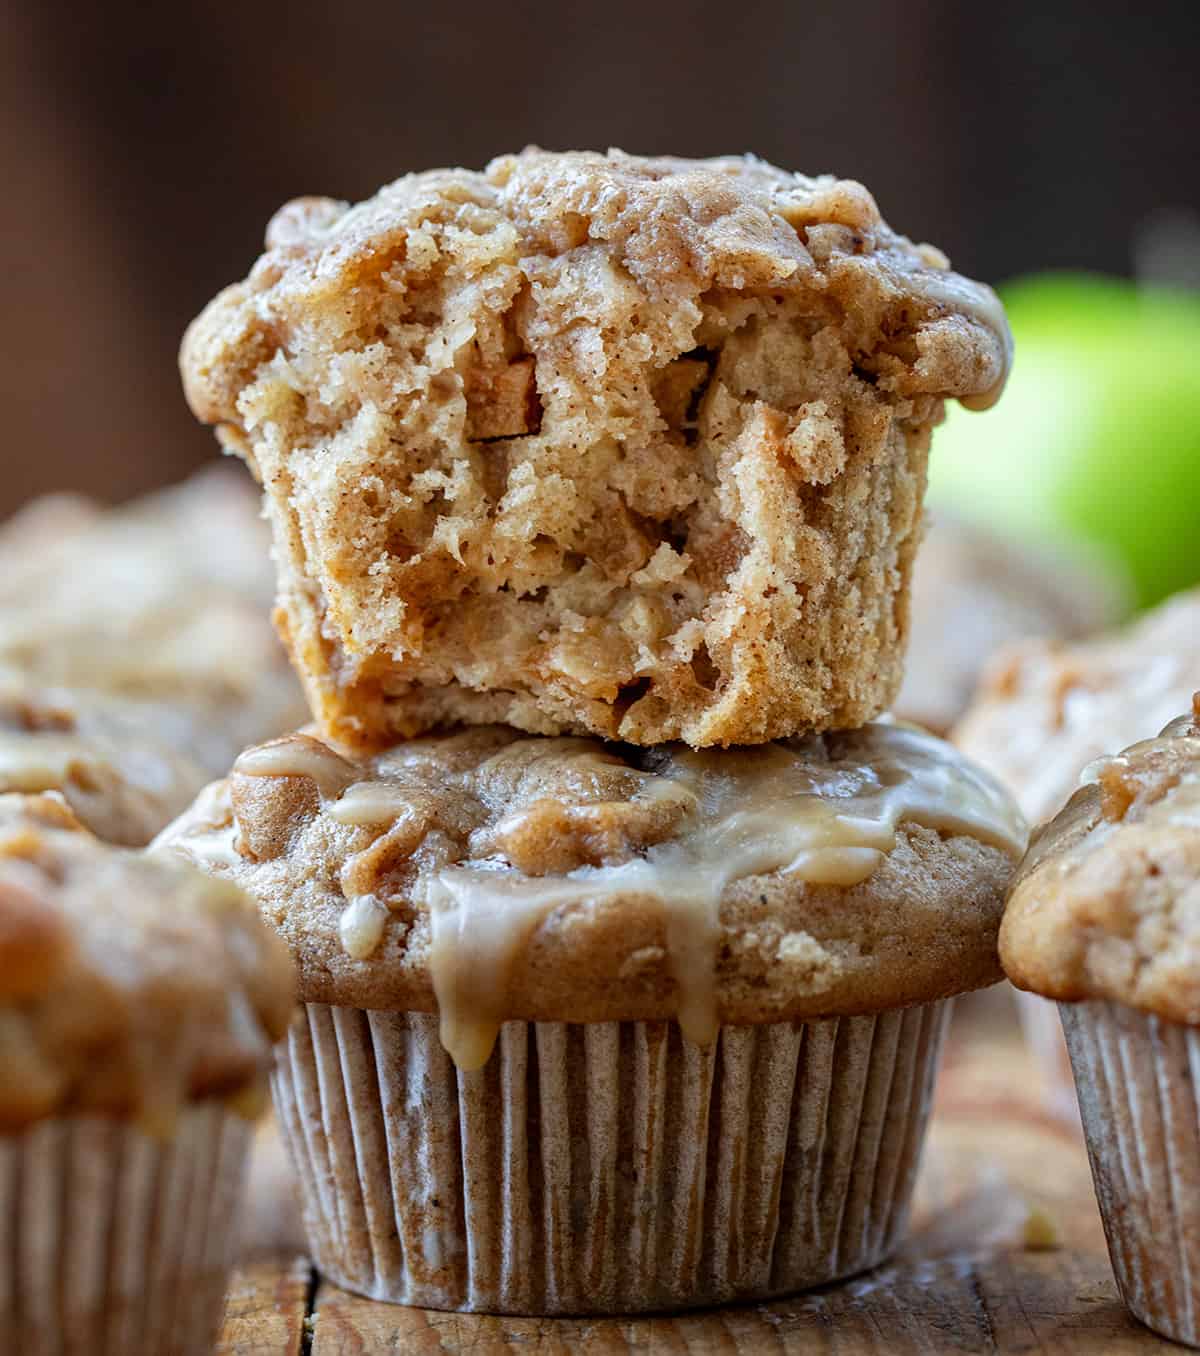 Half Apple Muffin on Top of Another Muffin on a Cutting Board with an Apple in the Back.